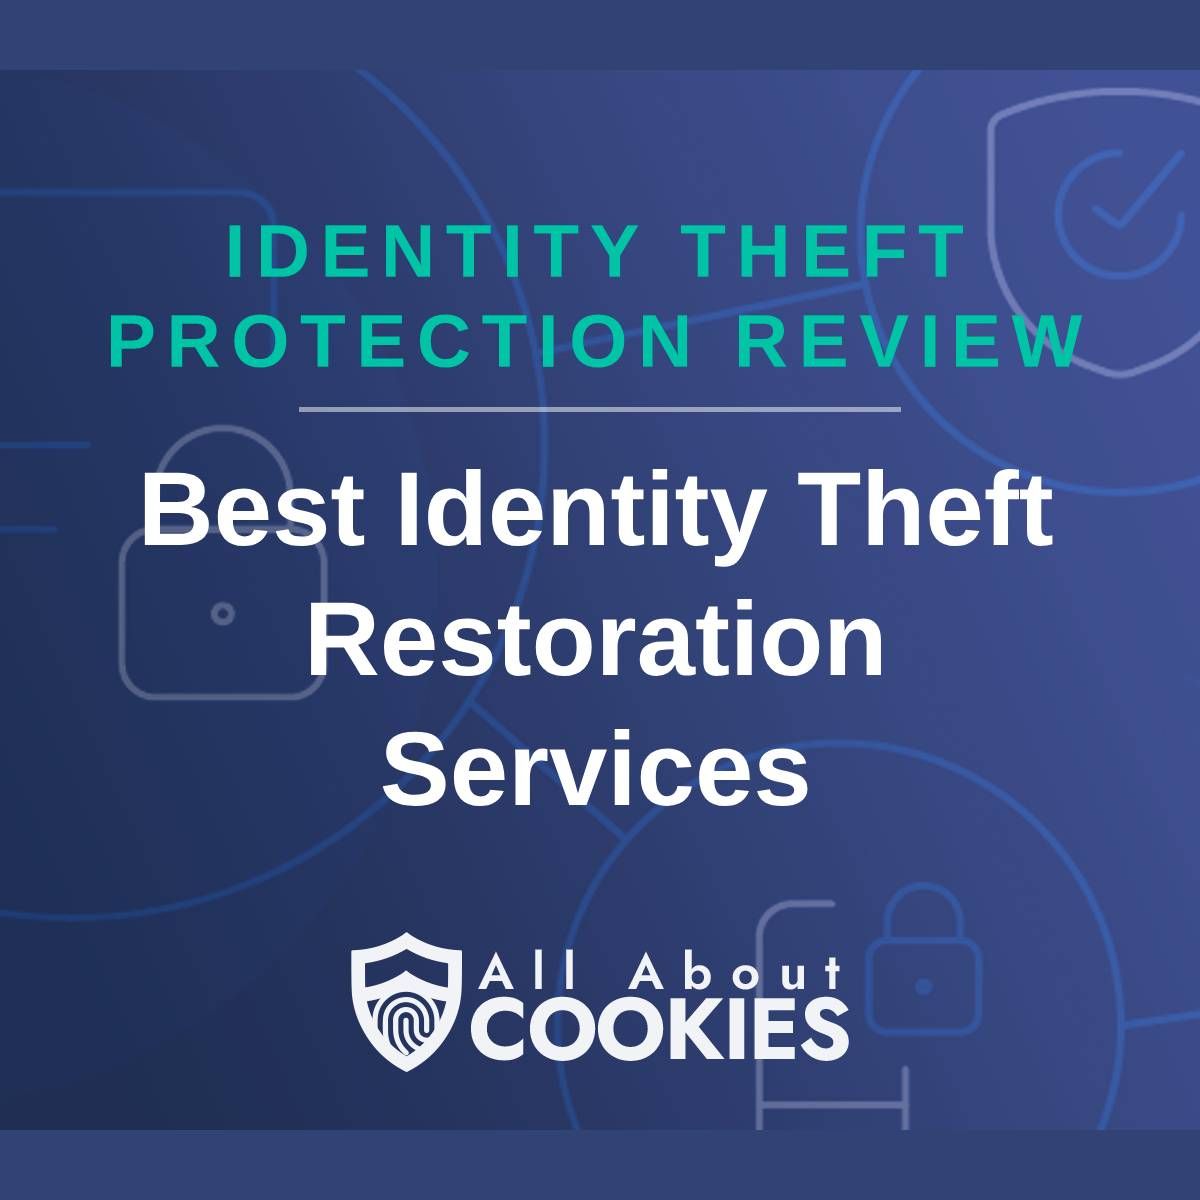 A blue background with images of locks and shields with the text "Identity Theft Protection Review Best Identity Theft Restoration Services" and the All About Cookies logo. 